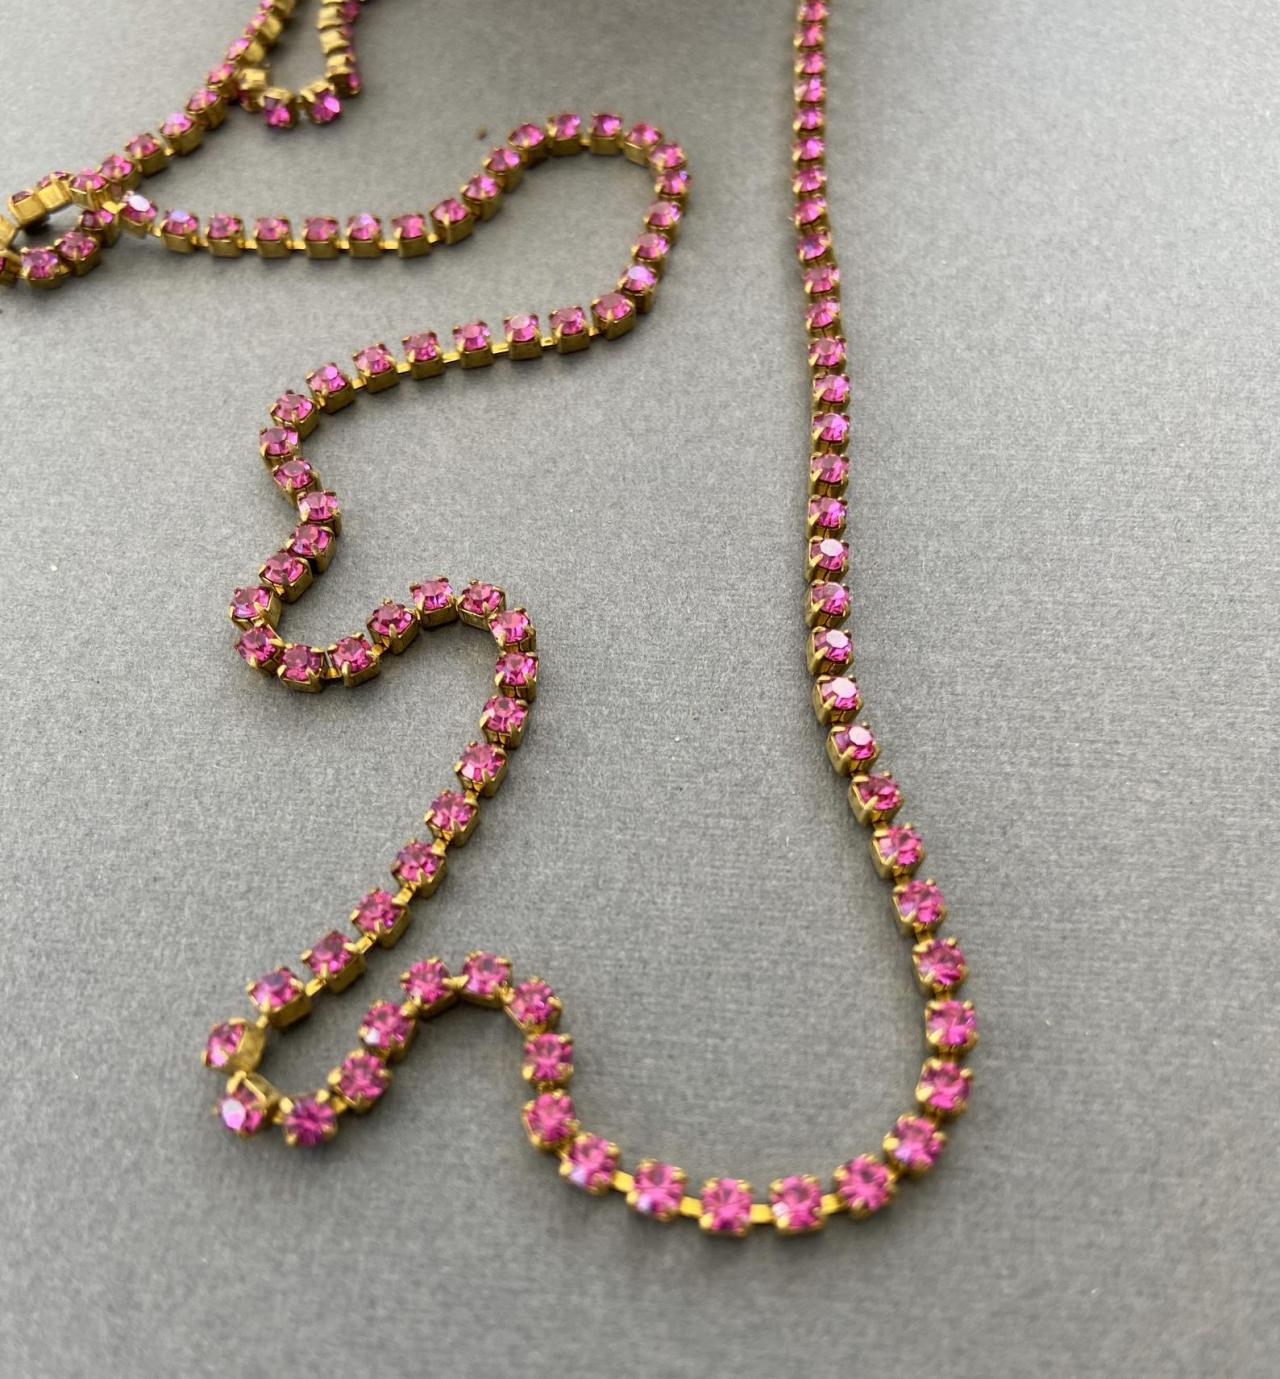 2.5mm Pink Fuchsia Solid Brass Gold Cup Chain Crystal Rhinestone Pp18 Ss8